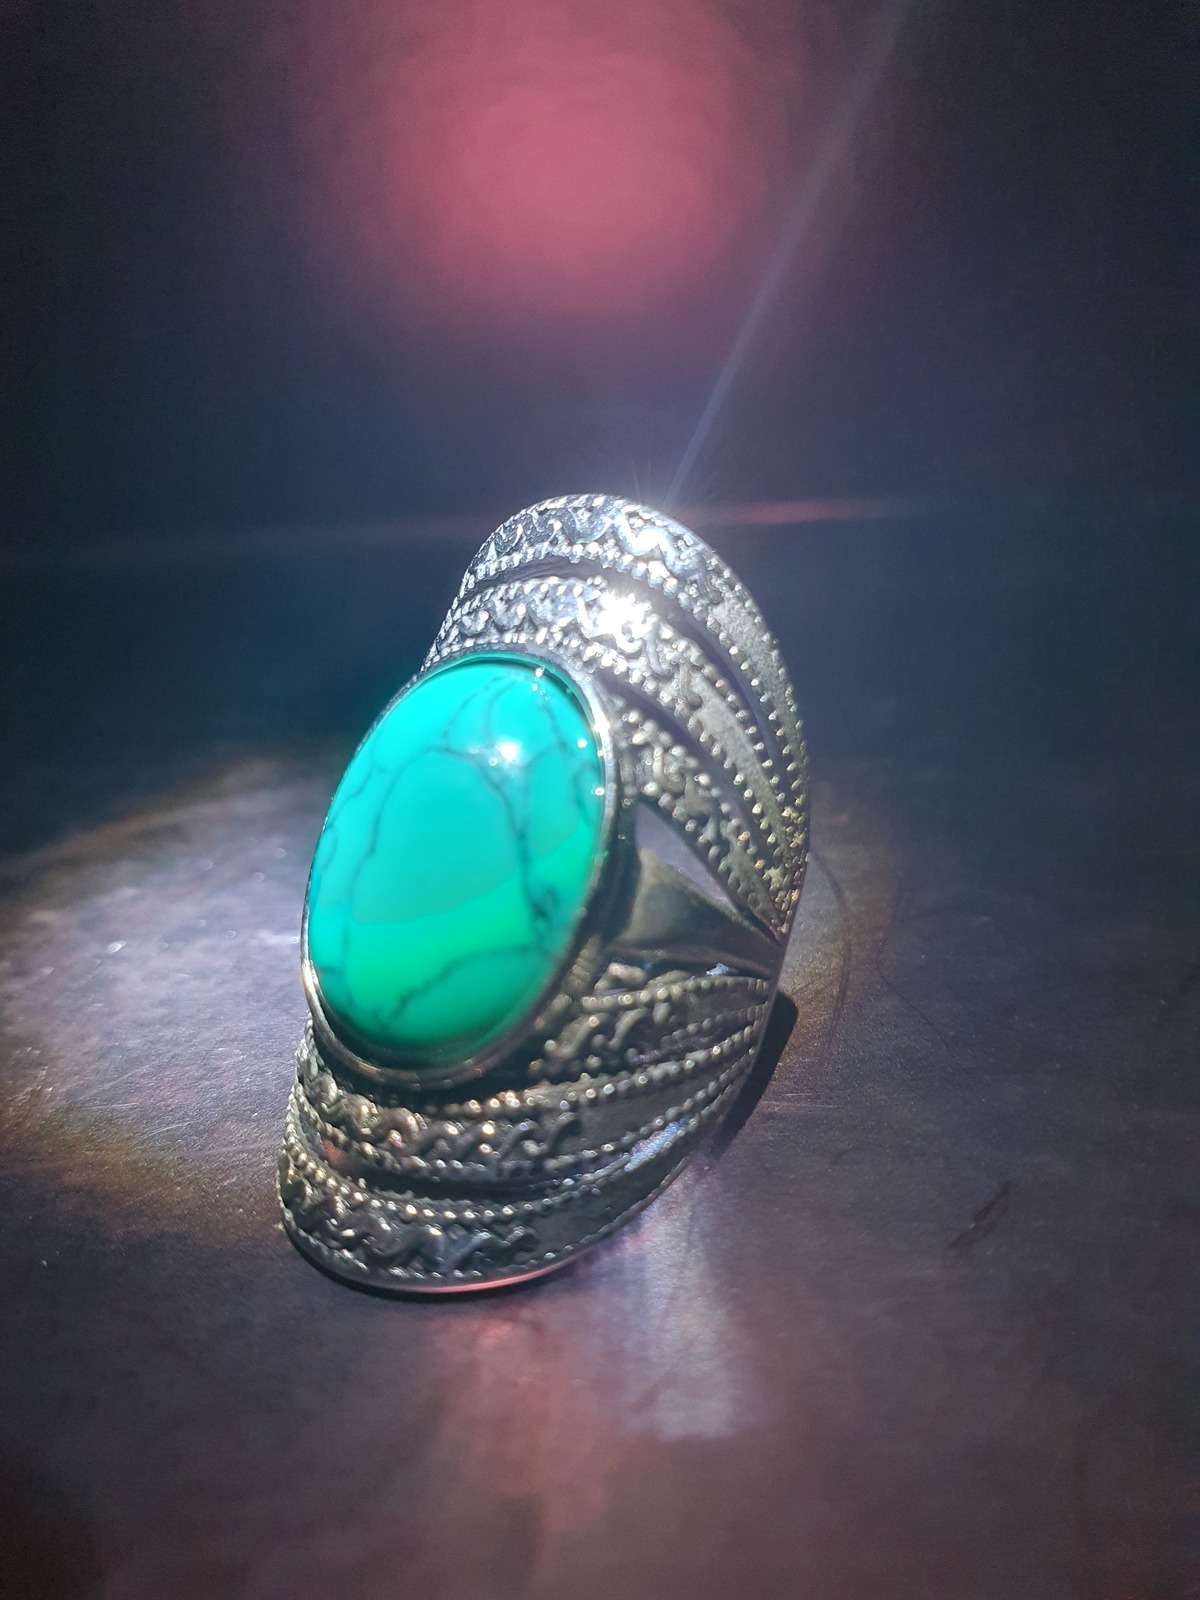 Primary image for HAUNTED RING, MONEY SPELL, magic ring, haunted jewelry  wealth prosperity, JINN